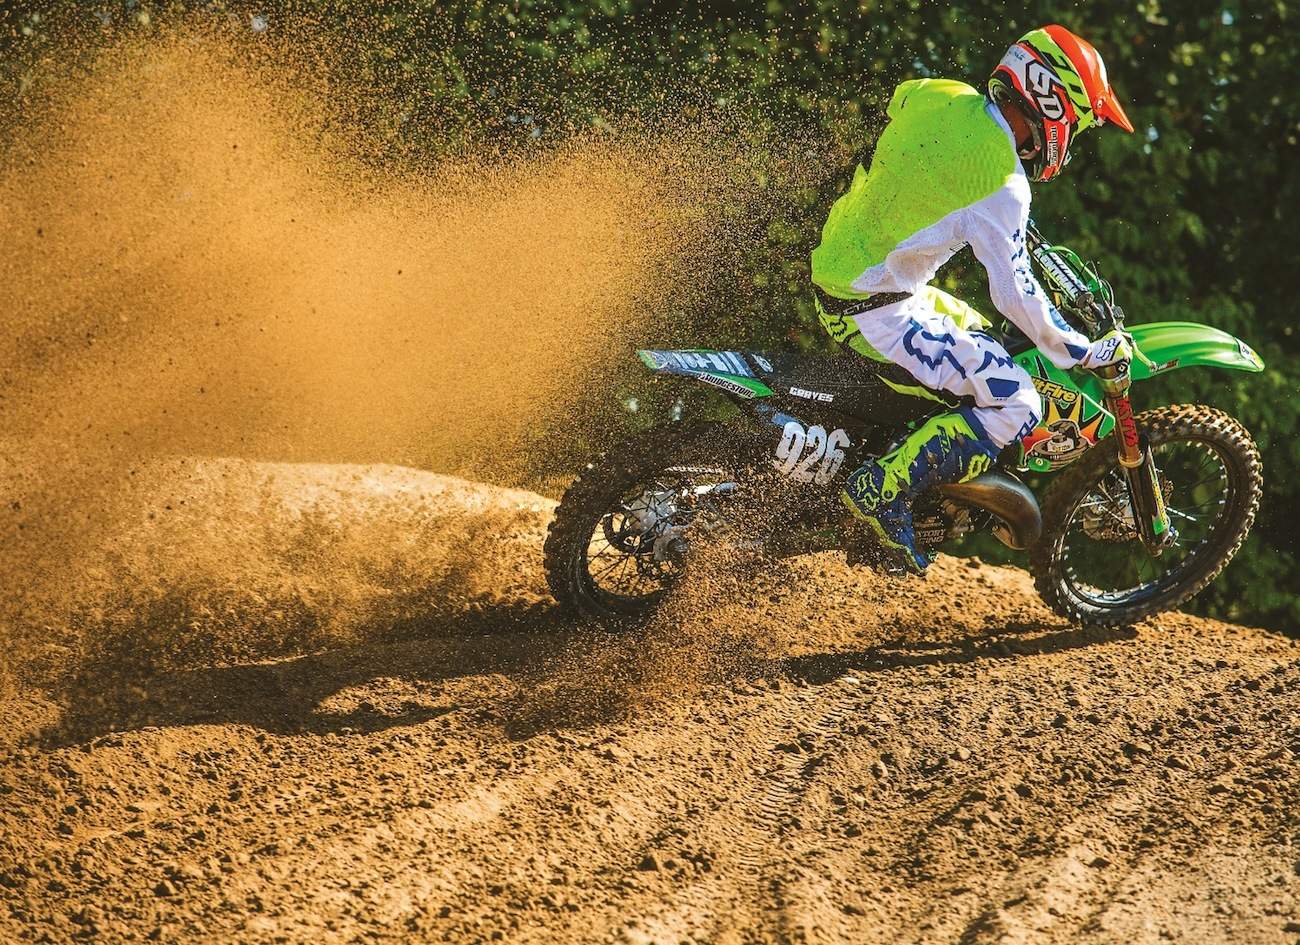 WE RIDE JOHNNY APPLESEED'S KX134 TWO-STROKE - Motocross Action 